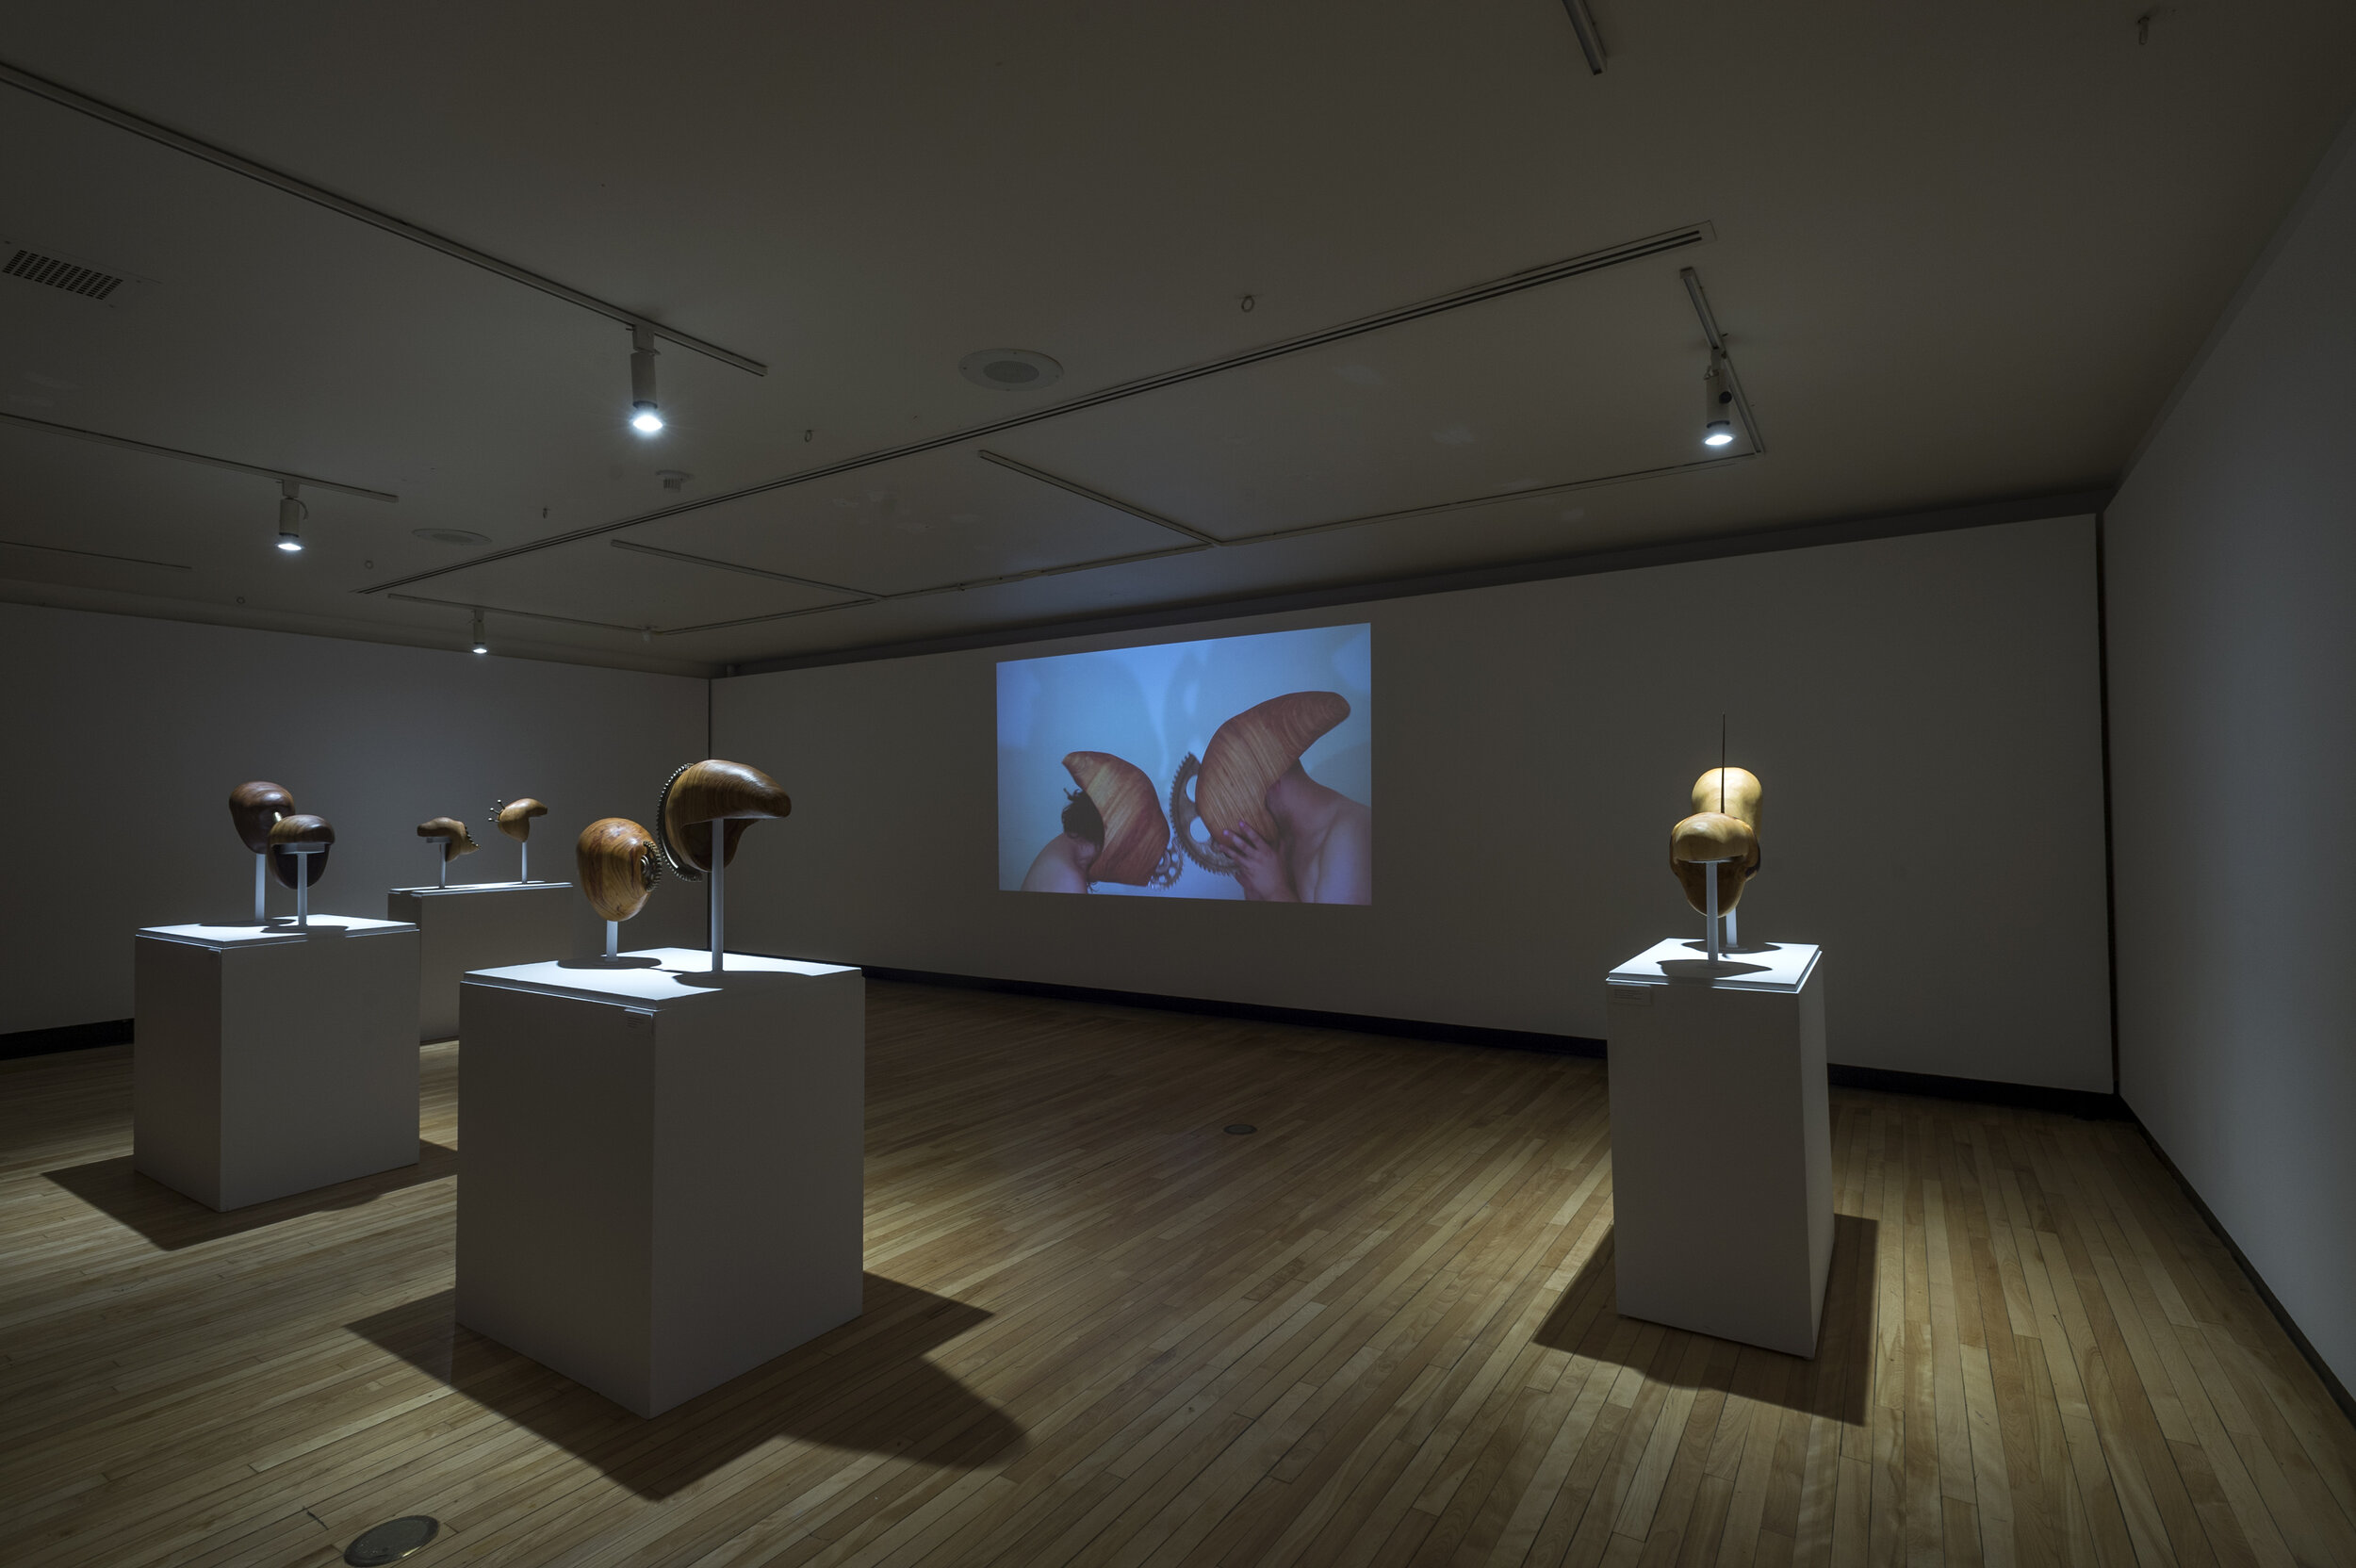  installation shot of Early Concepts of Eden installed at the Art Gallery of Guelph as part of the Mondes Bricolés group exhibition, August 23 – October 30, 2016.  